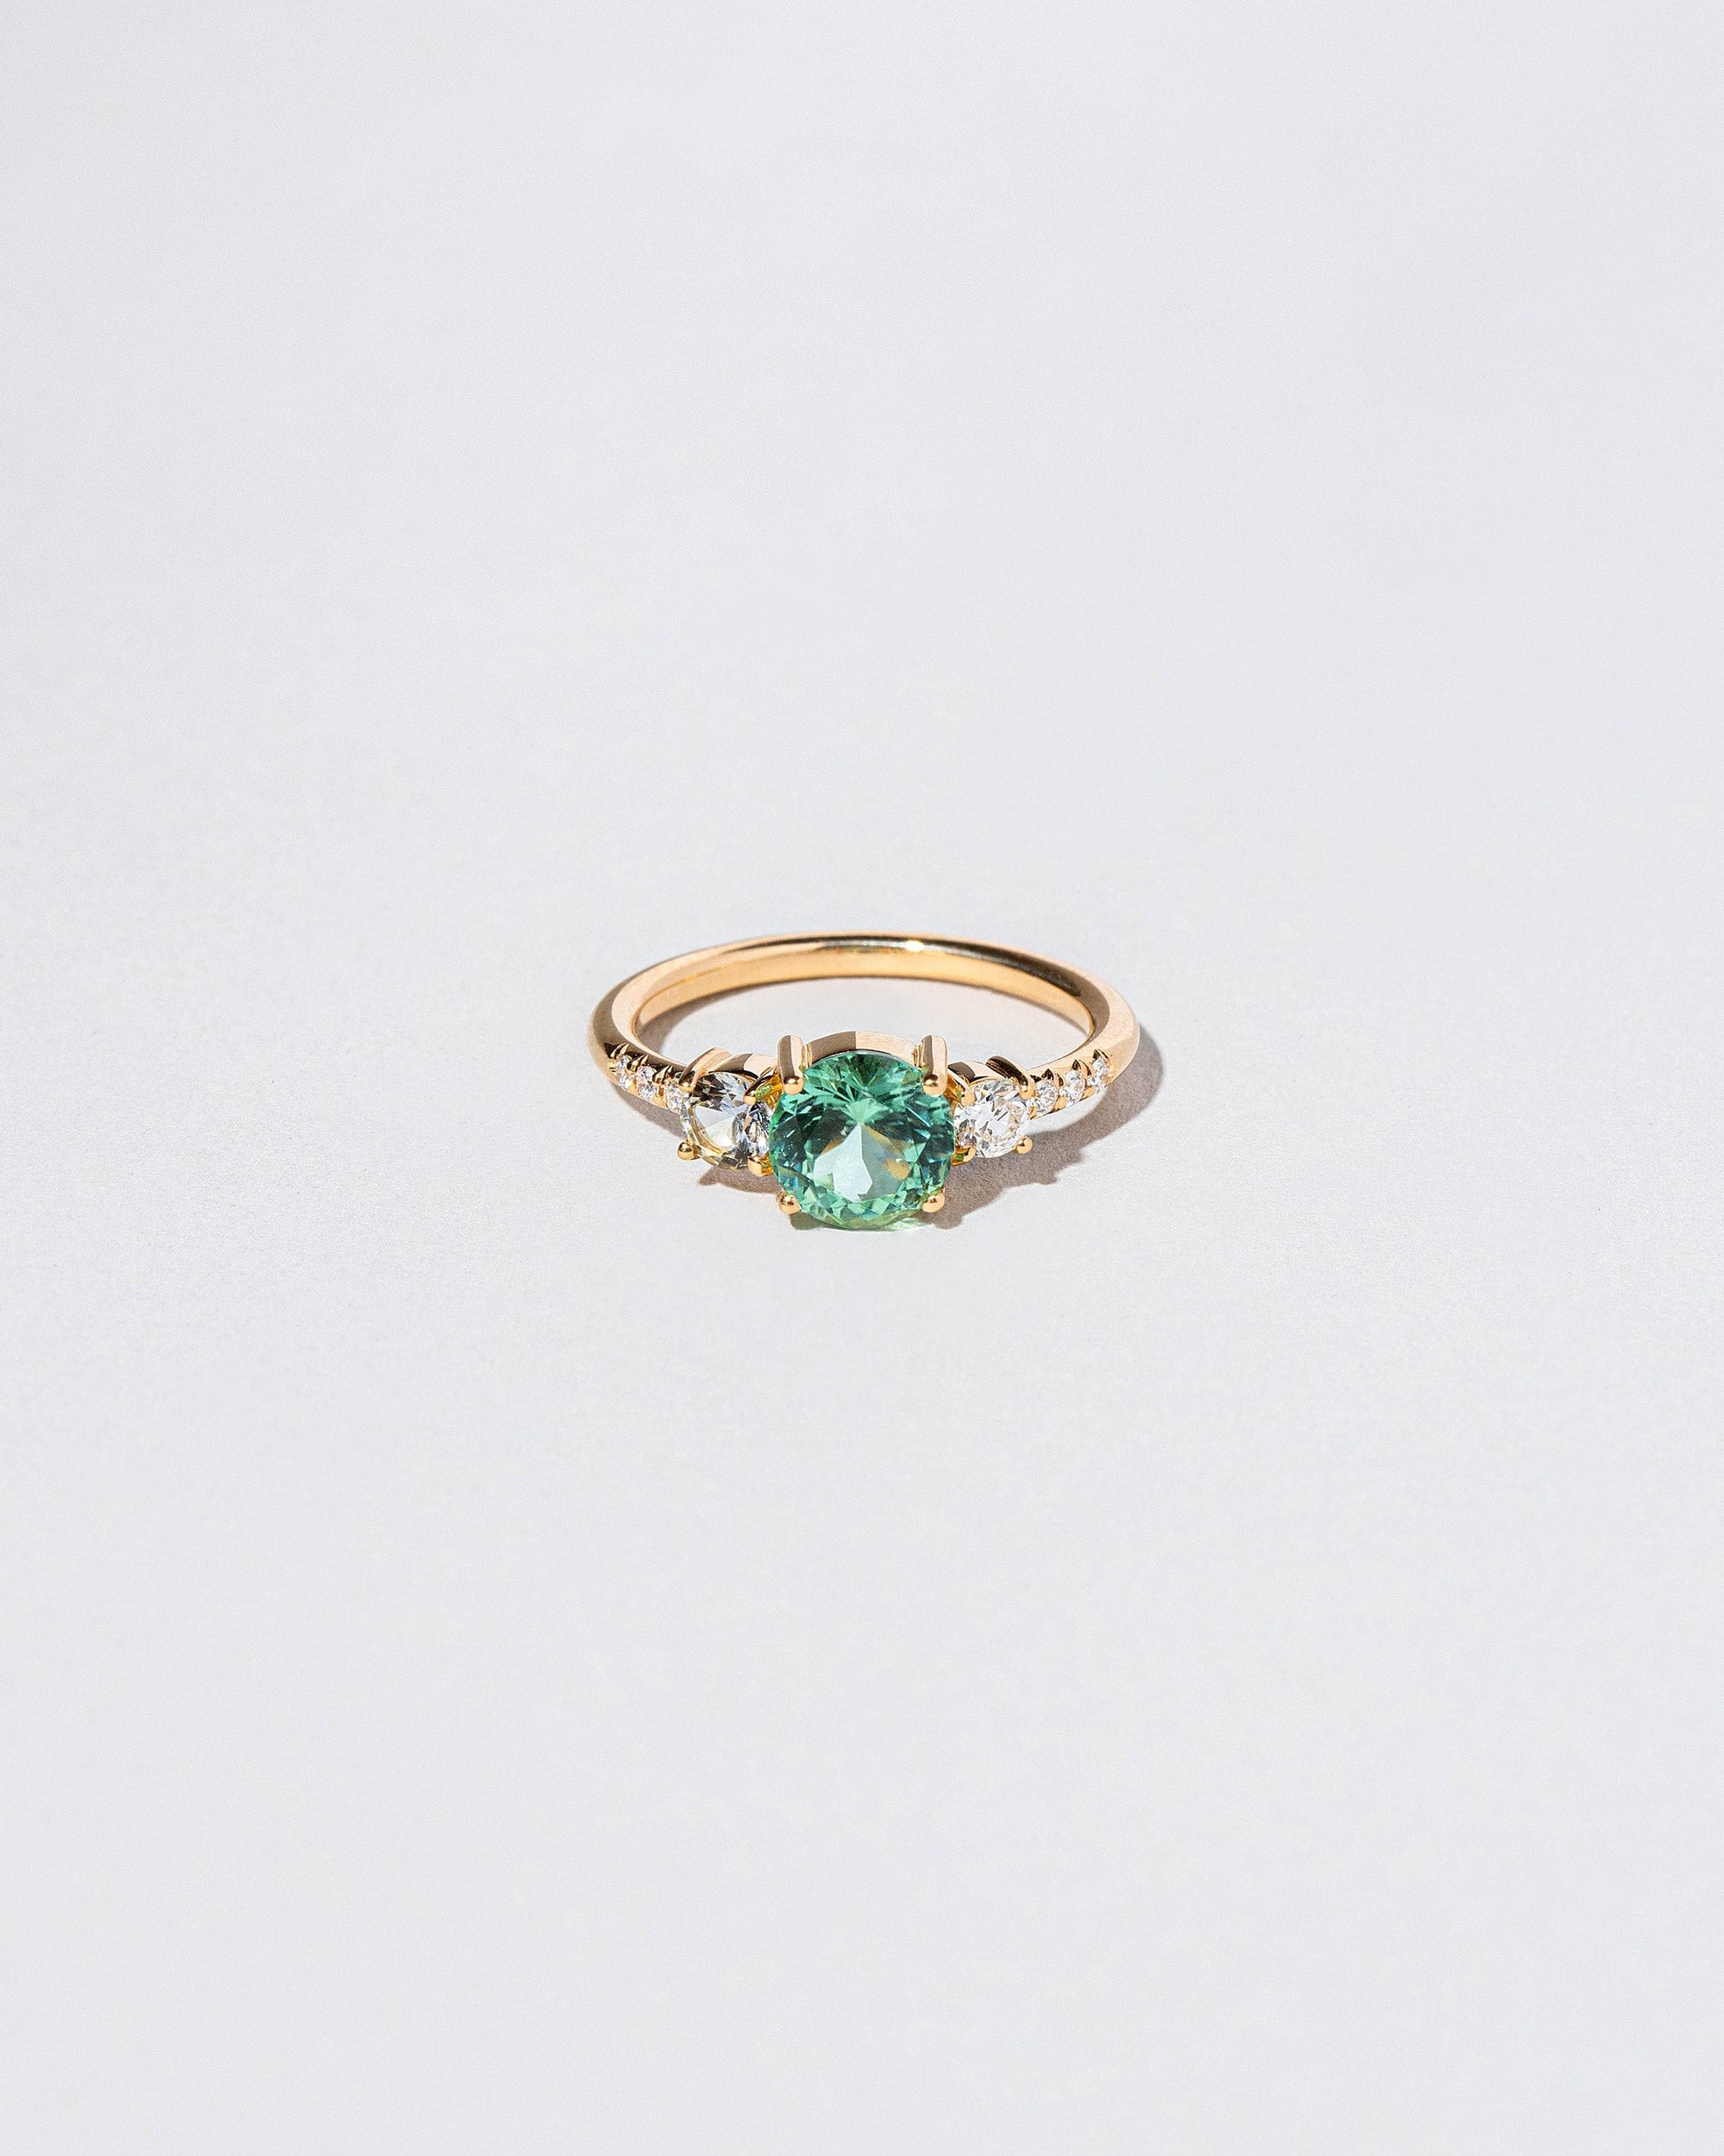  Orion Ring - Tourmaline on light color background.